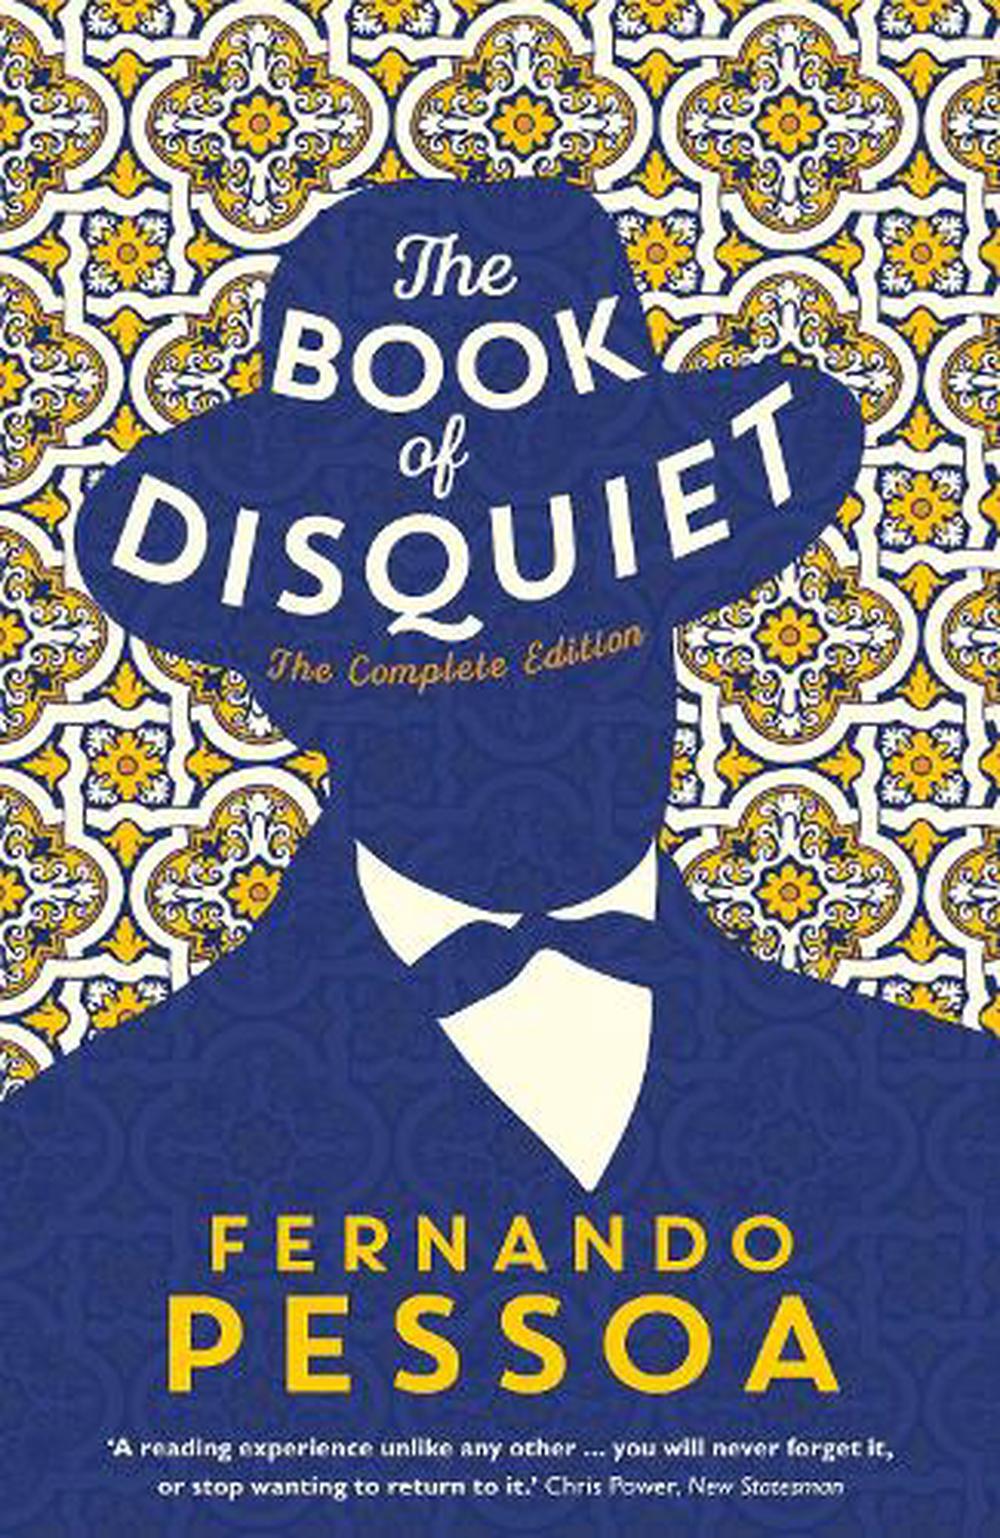 book review of disquiet